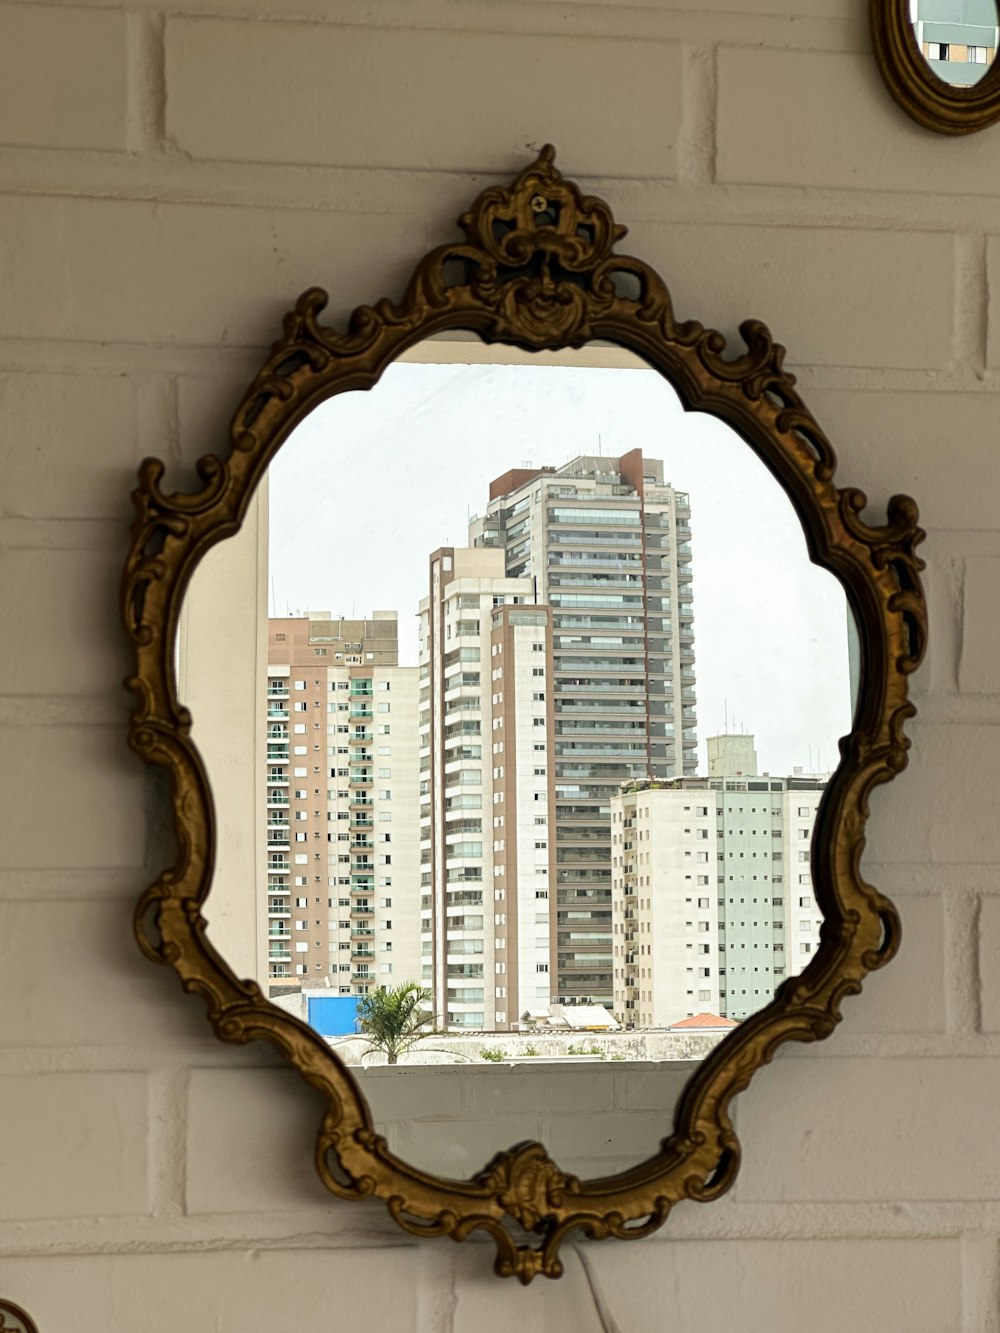 a mirror hanging on the wall of a building